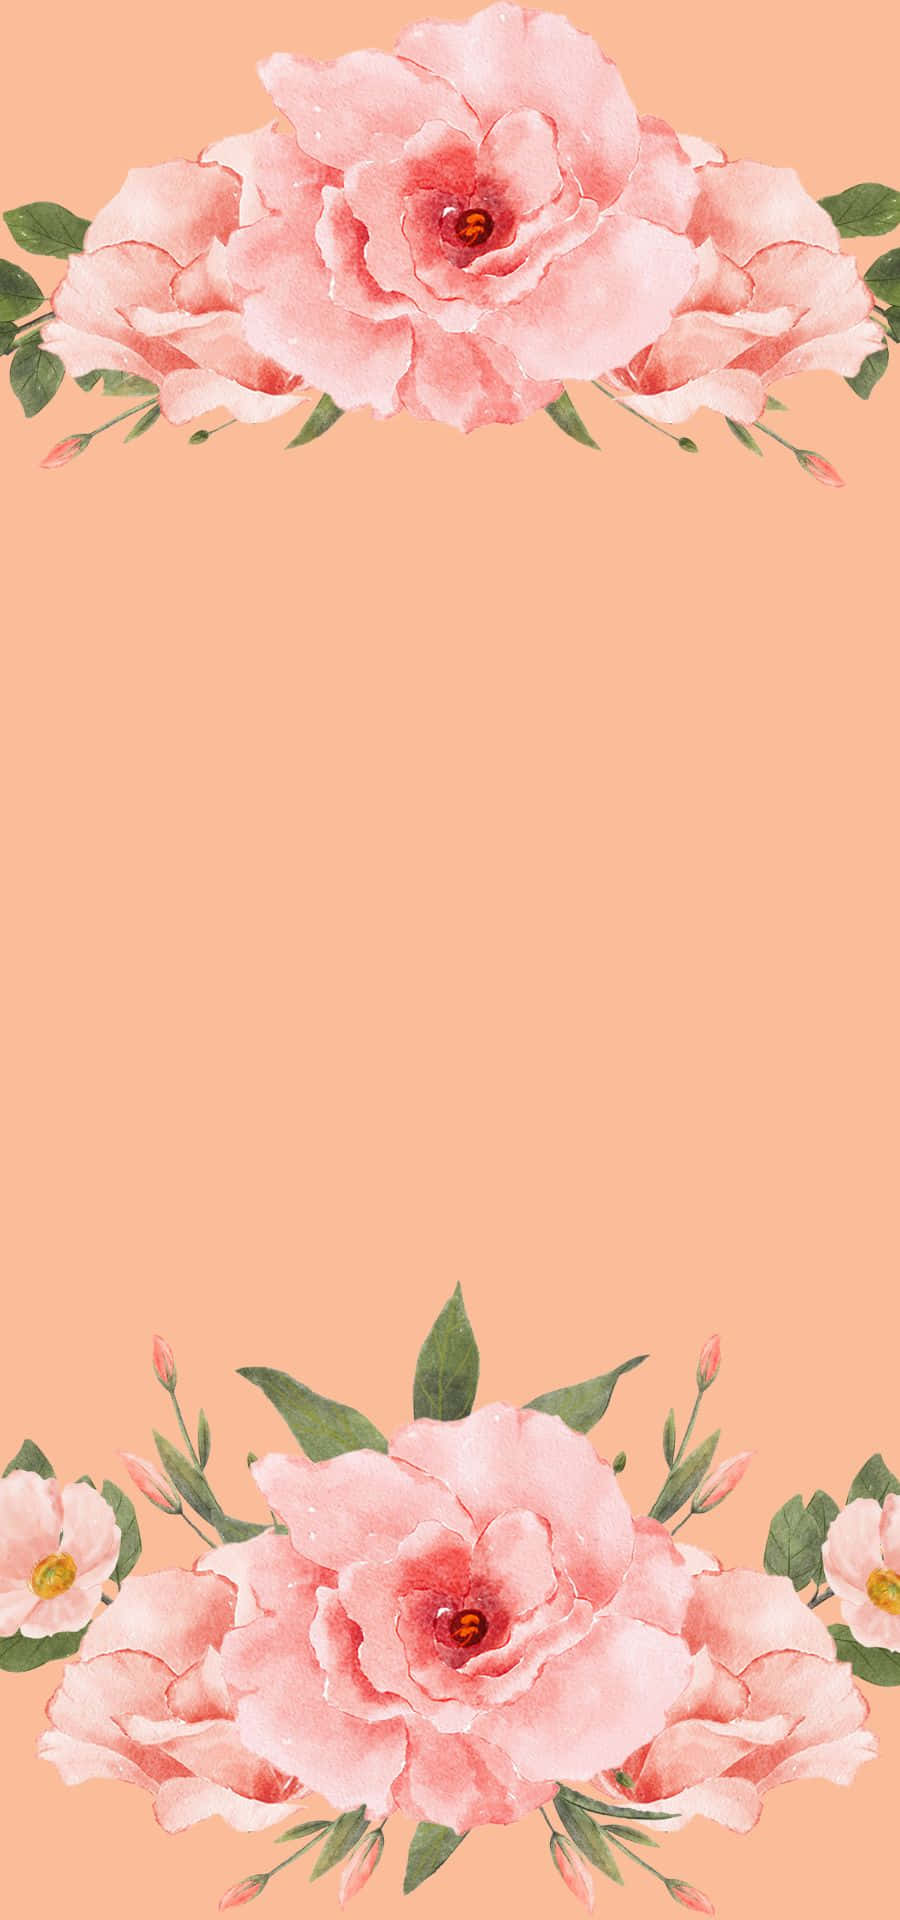 Bright and cheerful peach color background